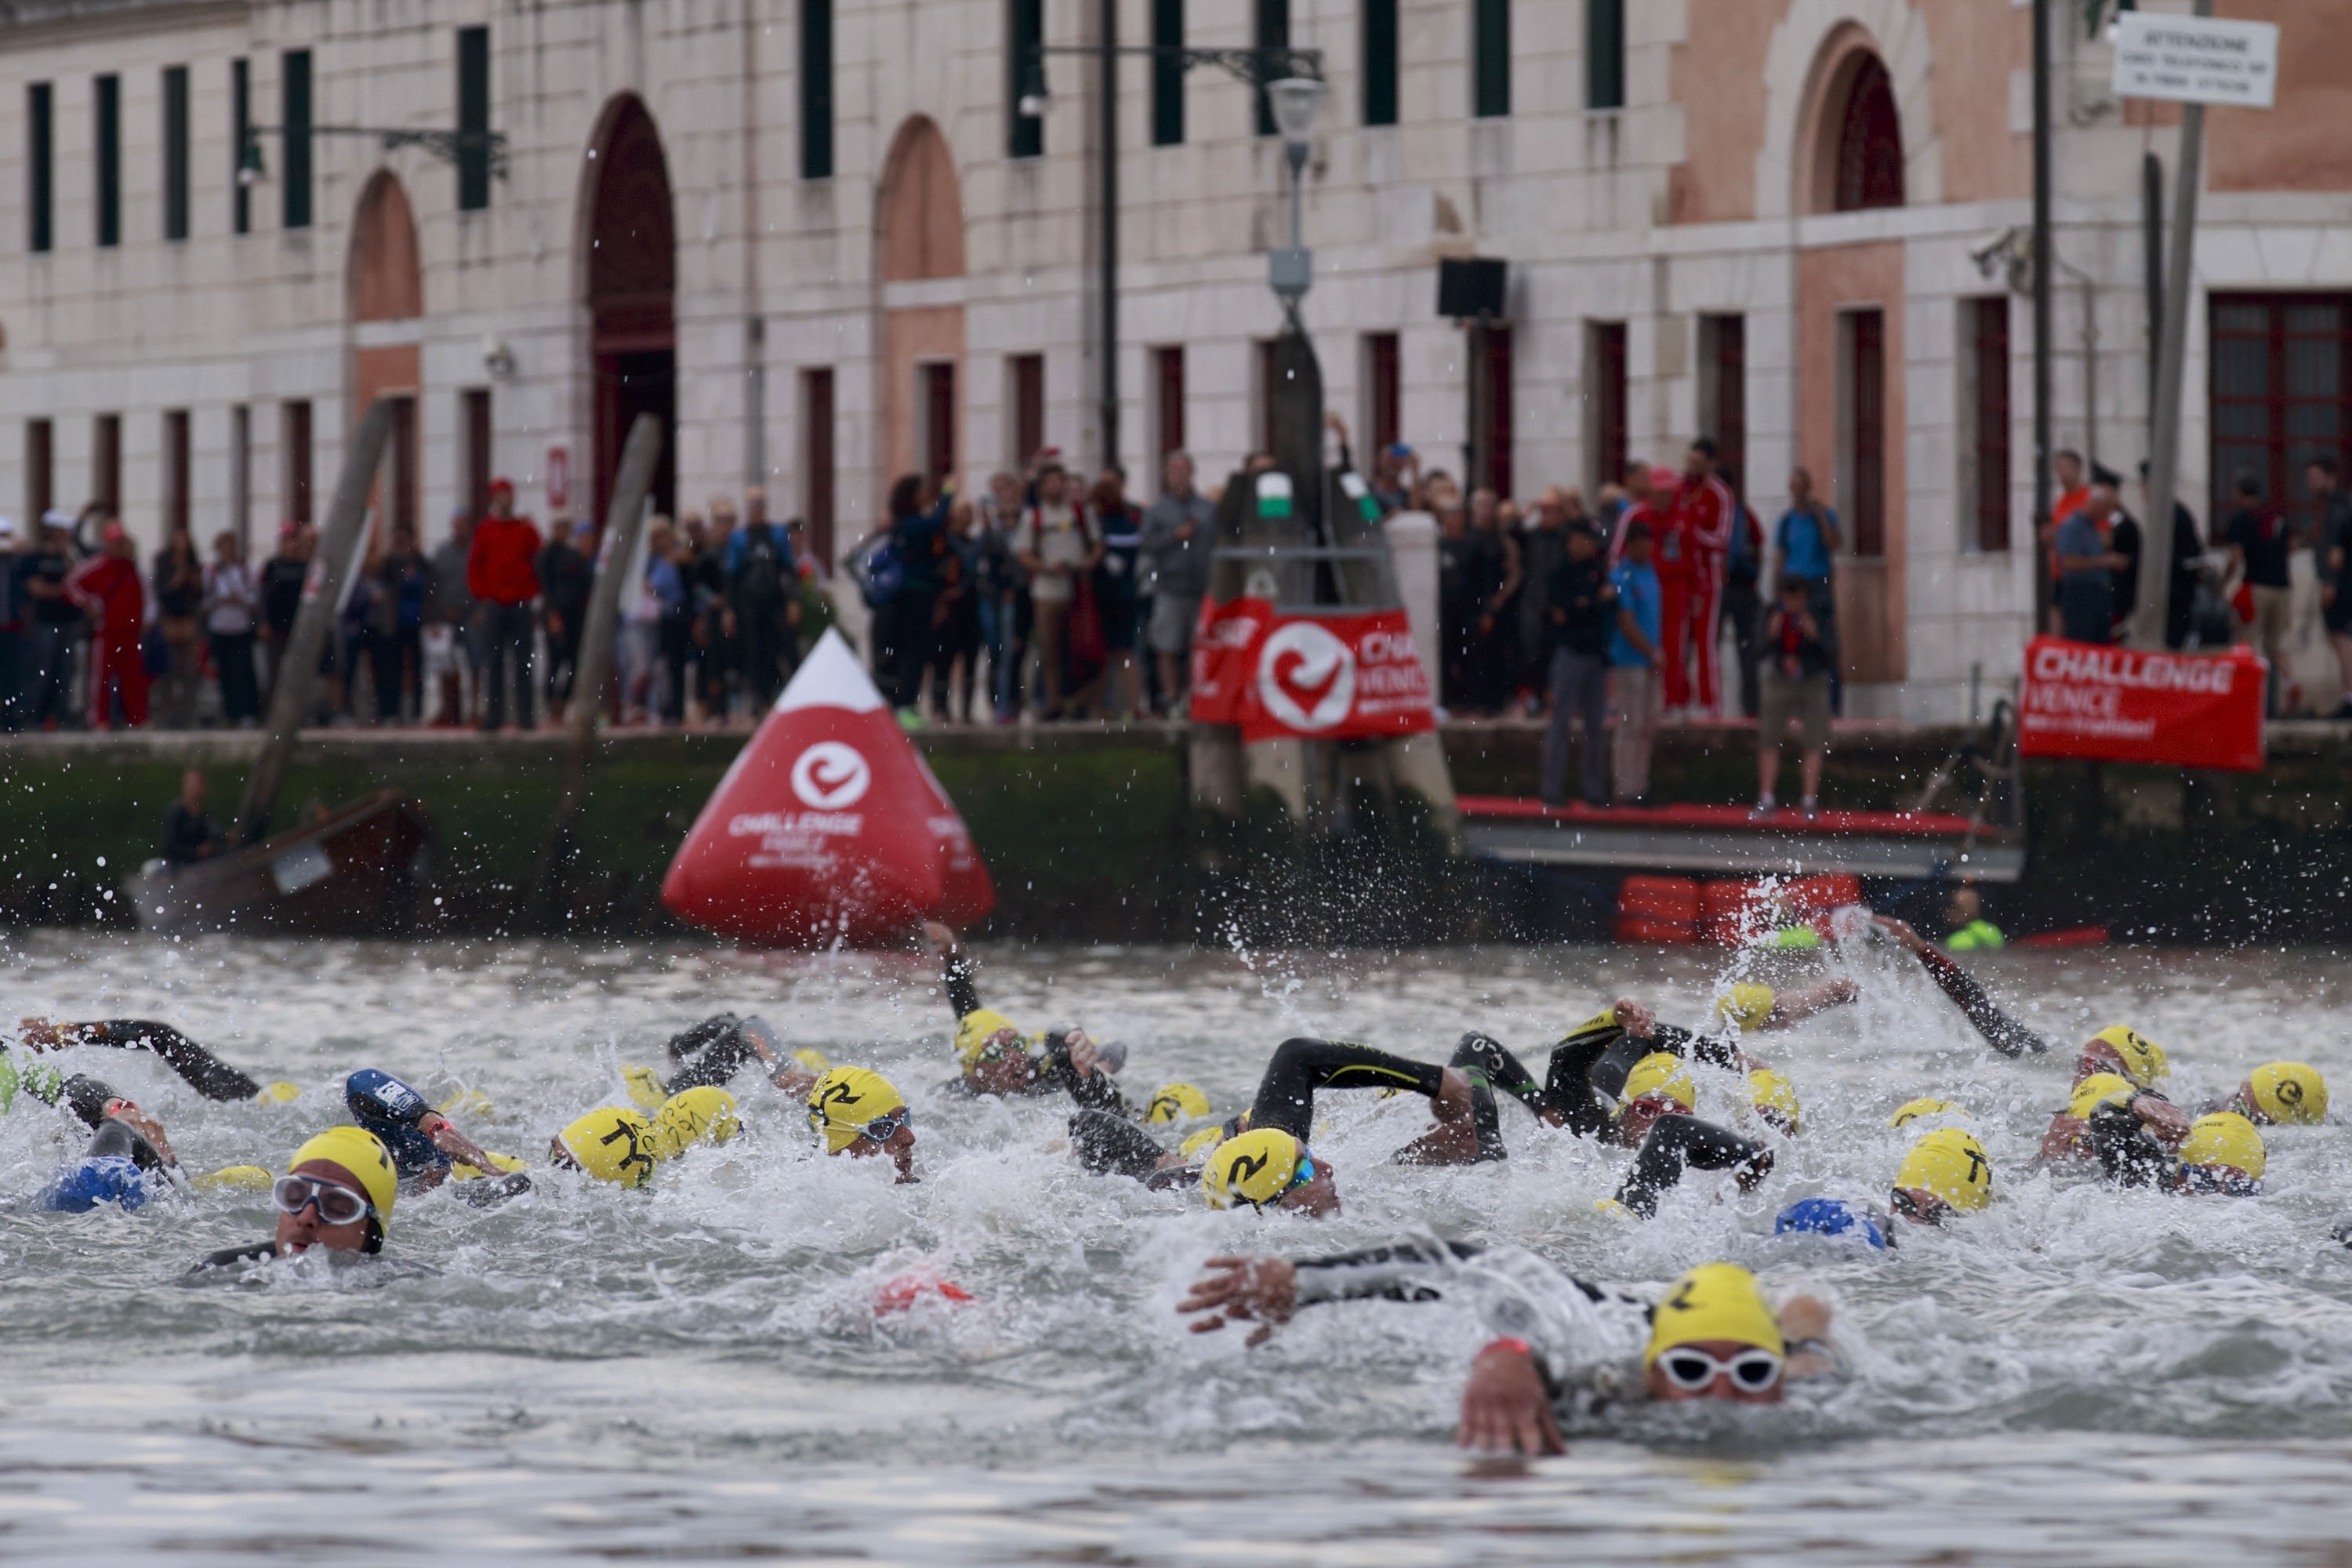 VENICE, ITALY - JUNE 05: Athletes compete during the swimming course during the Challenge Triathlon Venice on June 5, 2016 in Venice, Italy. (Photo by Gonzalo Arroyo Moreno/Getty Images)